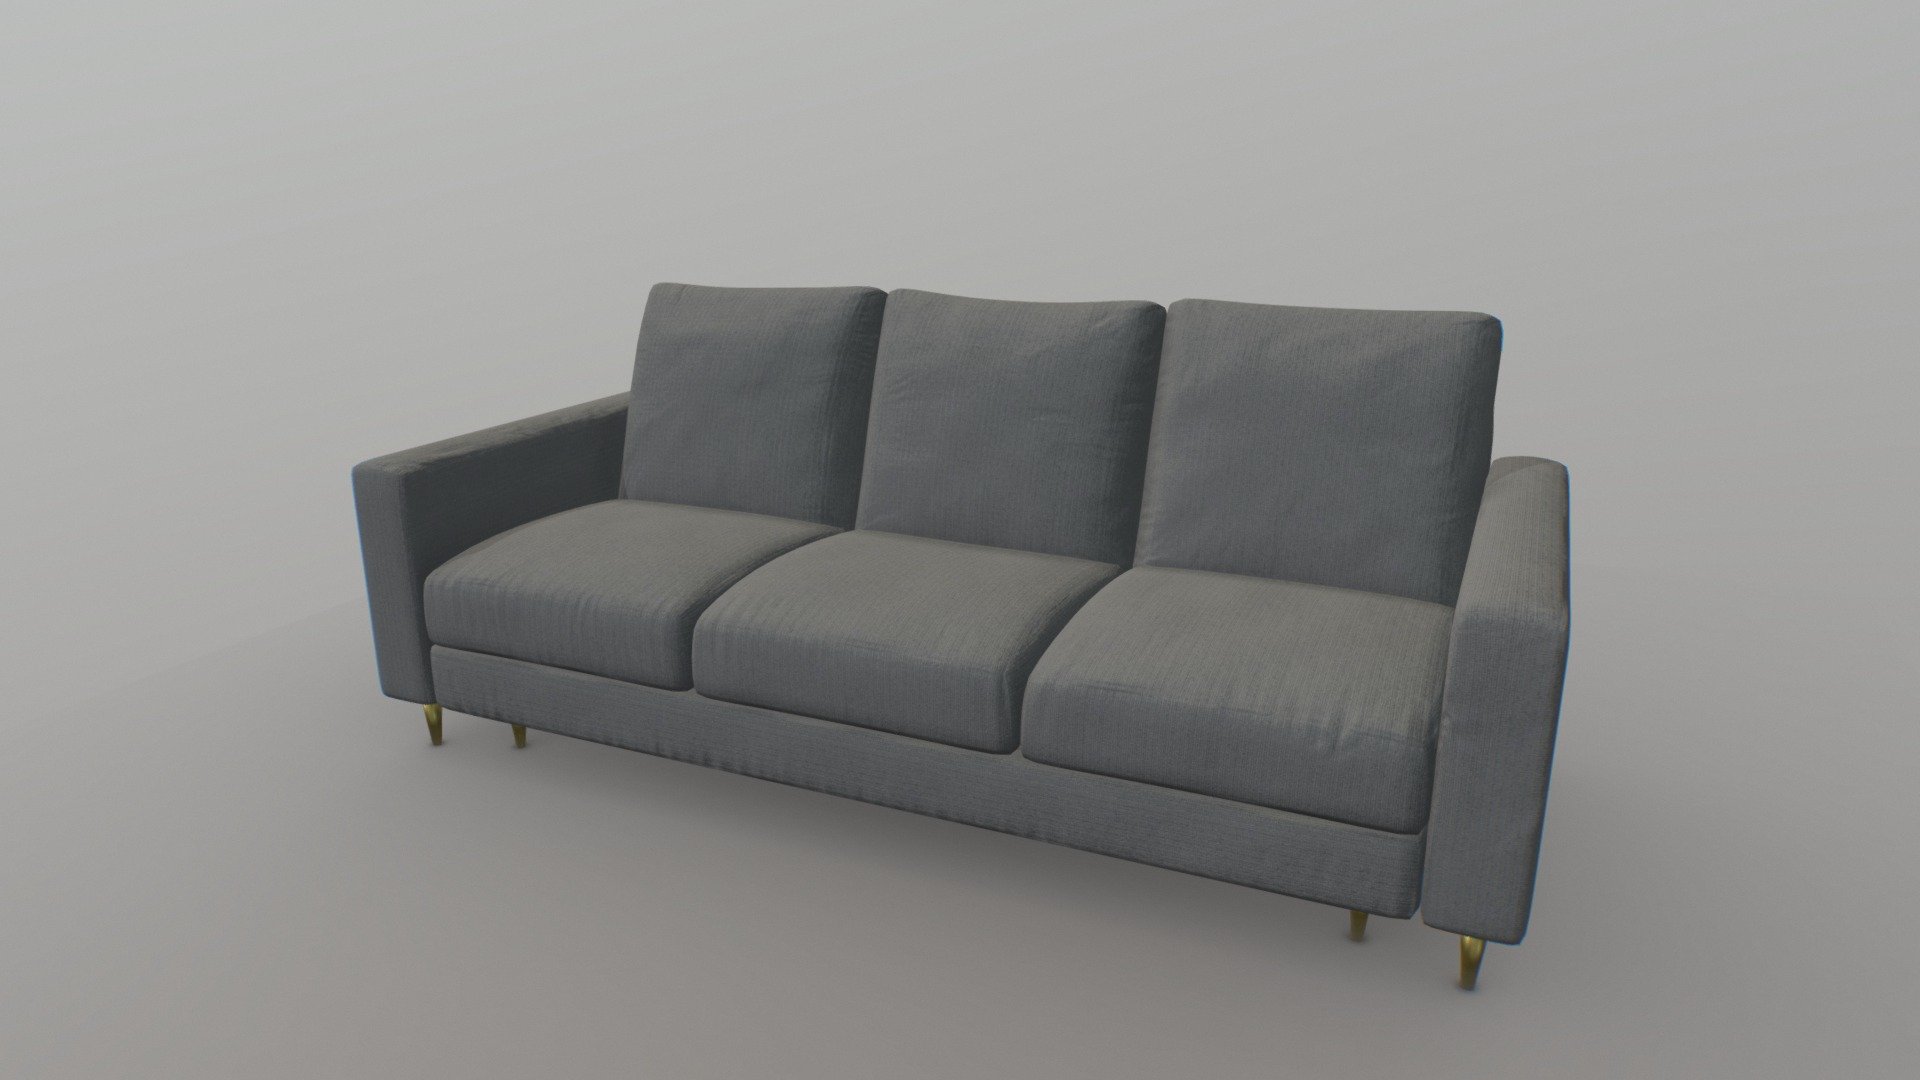 Made with Blender and Substance Painter. Inspired by this sofa

Hope you'll like ! - Sofa - Buy Royalty Free 3D model by Michel Cousin (@msama) 3d model